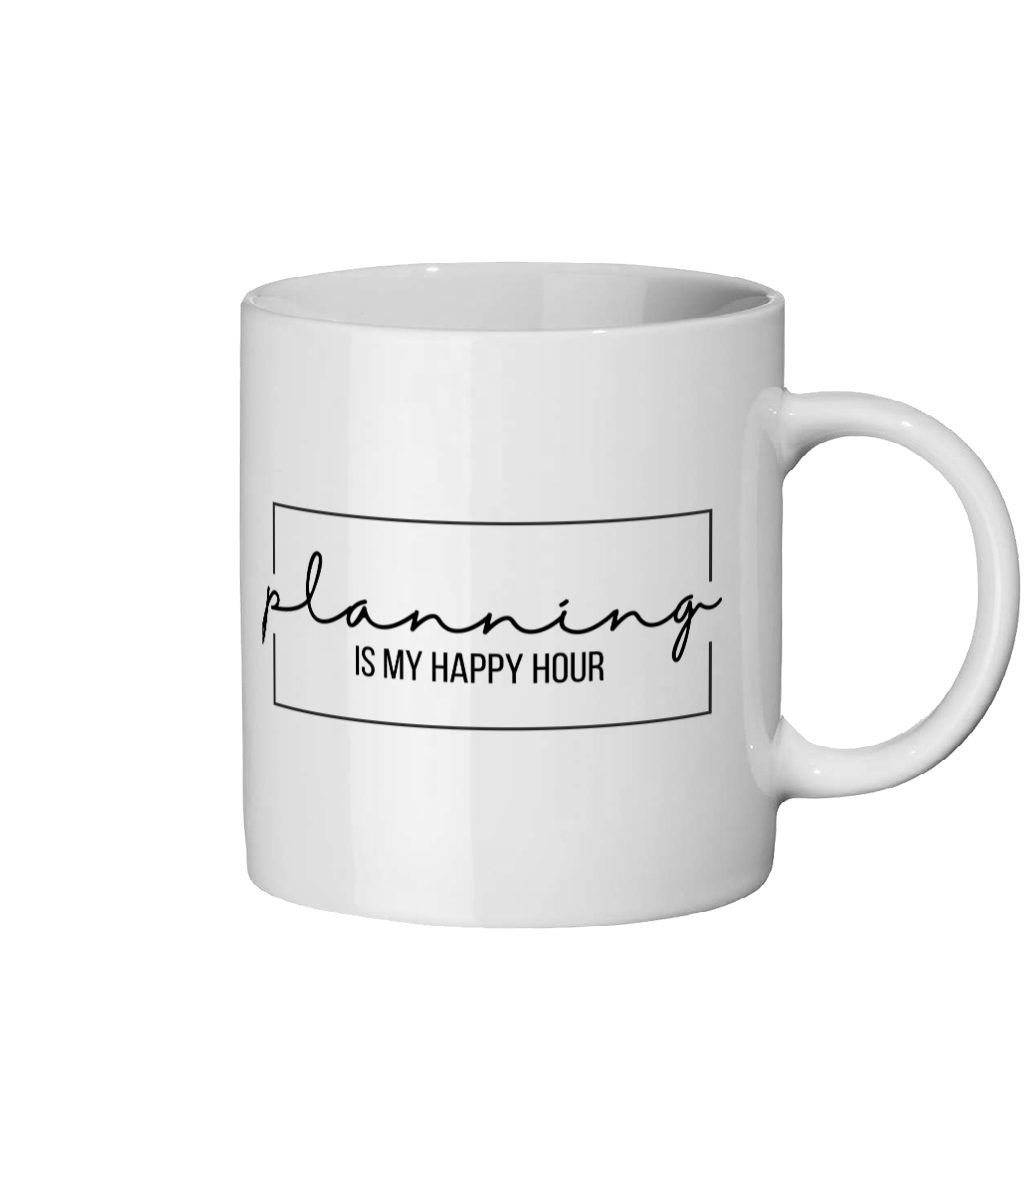 Planning is My Happy Hour 11 oz mug. Planning, Organisation, Productivity, Motivation, Inspiration, Empowering. Perfect Gift.